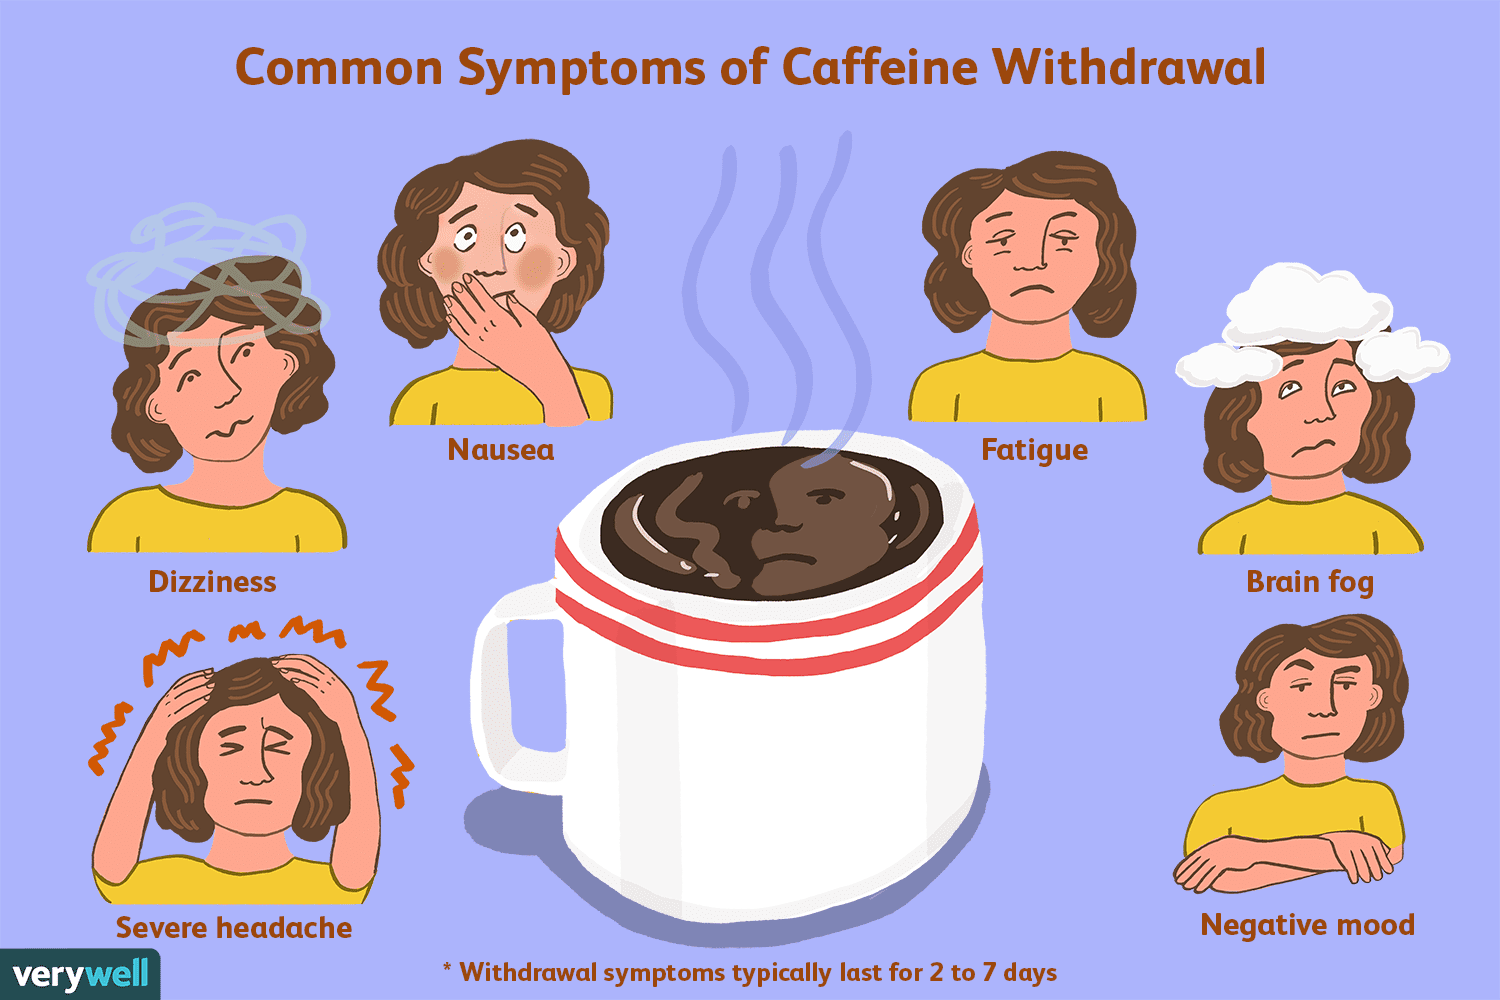 Can Caffeine Withdrawal Cause Loss of Appetite?